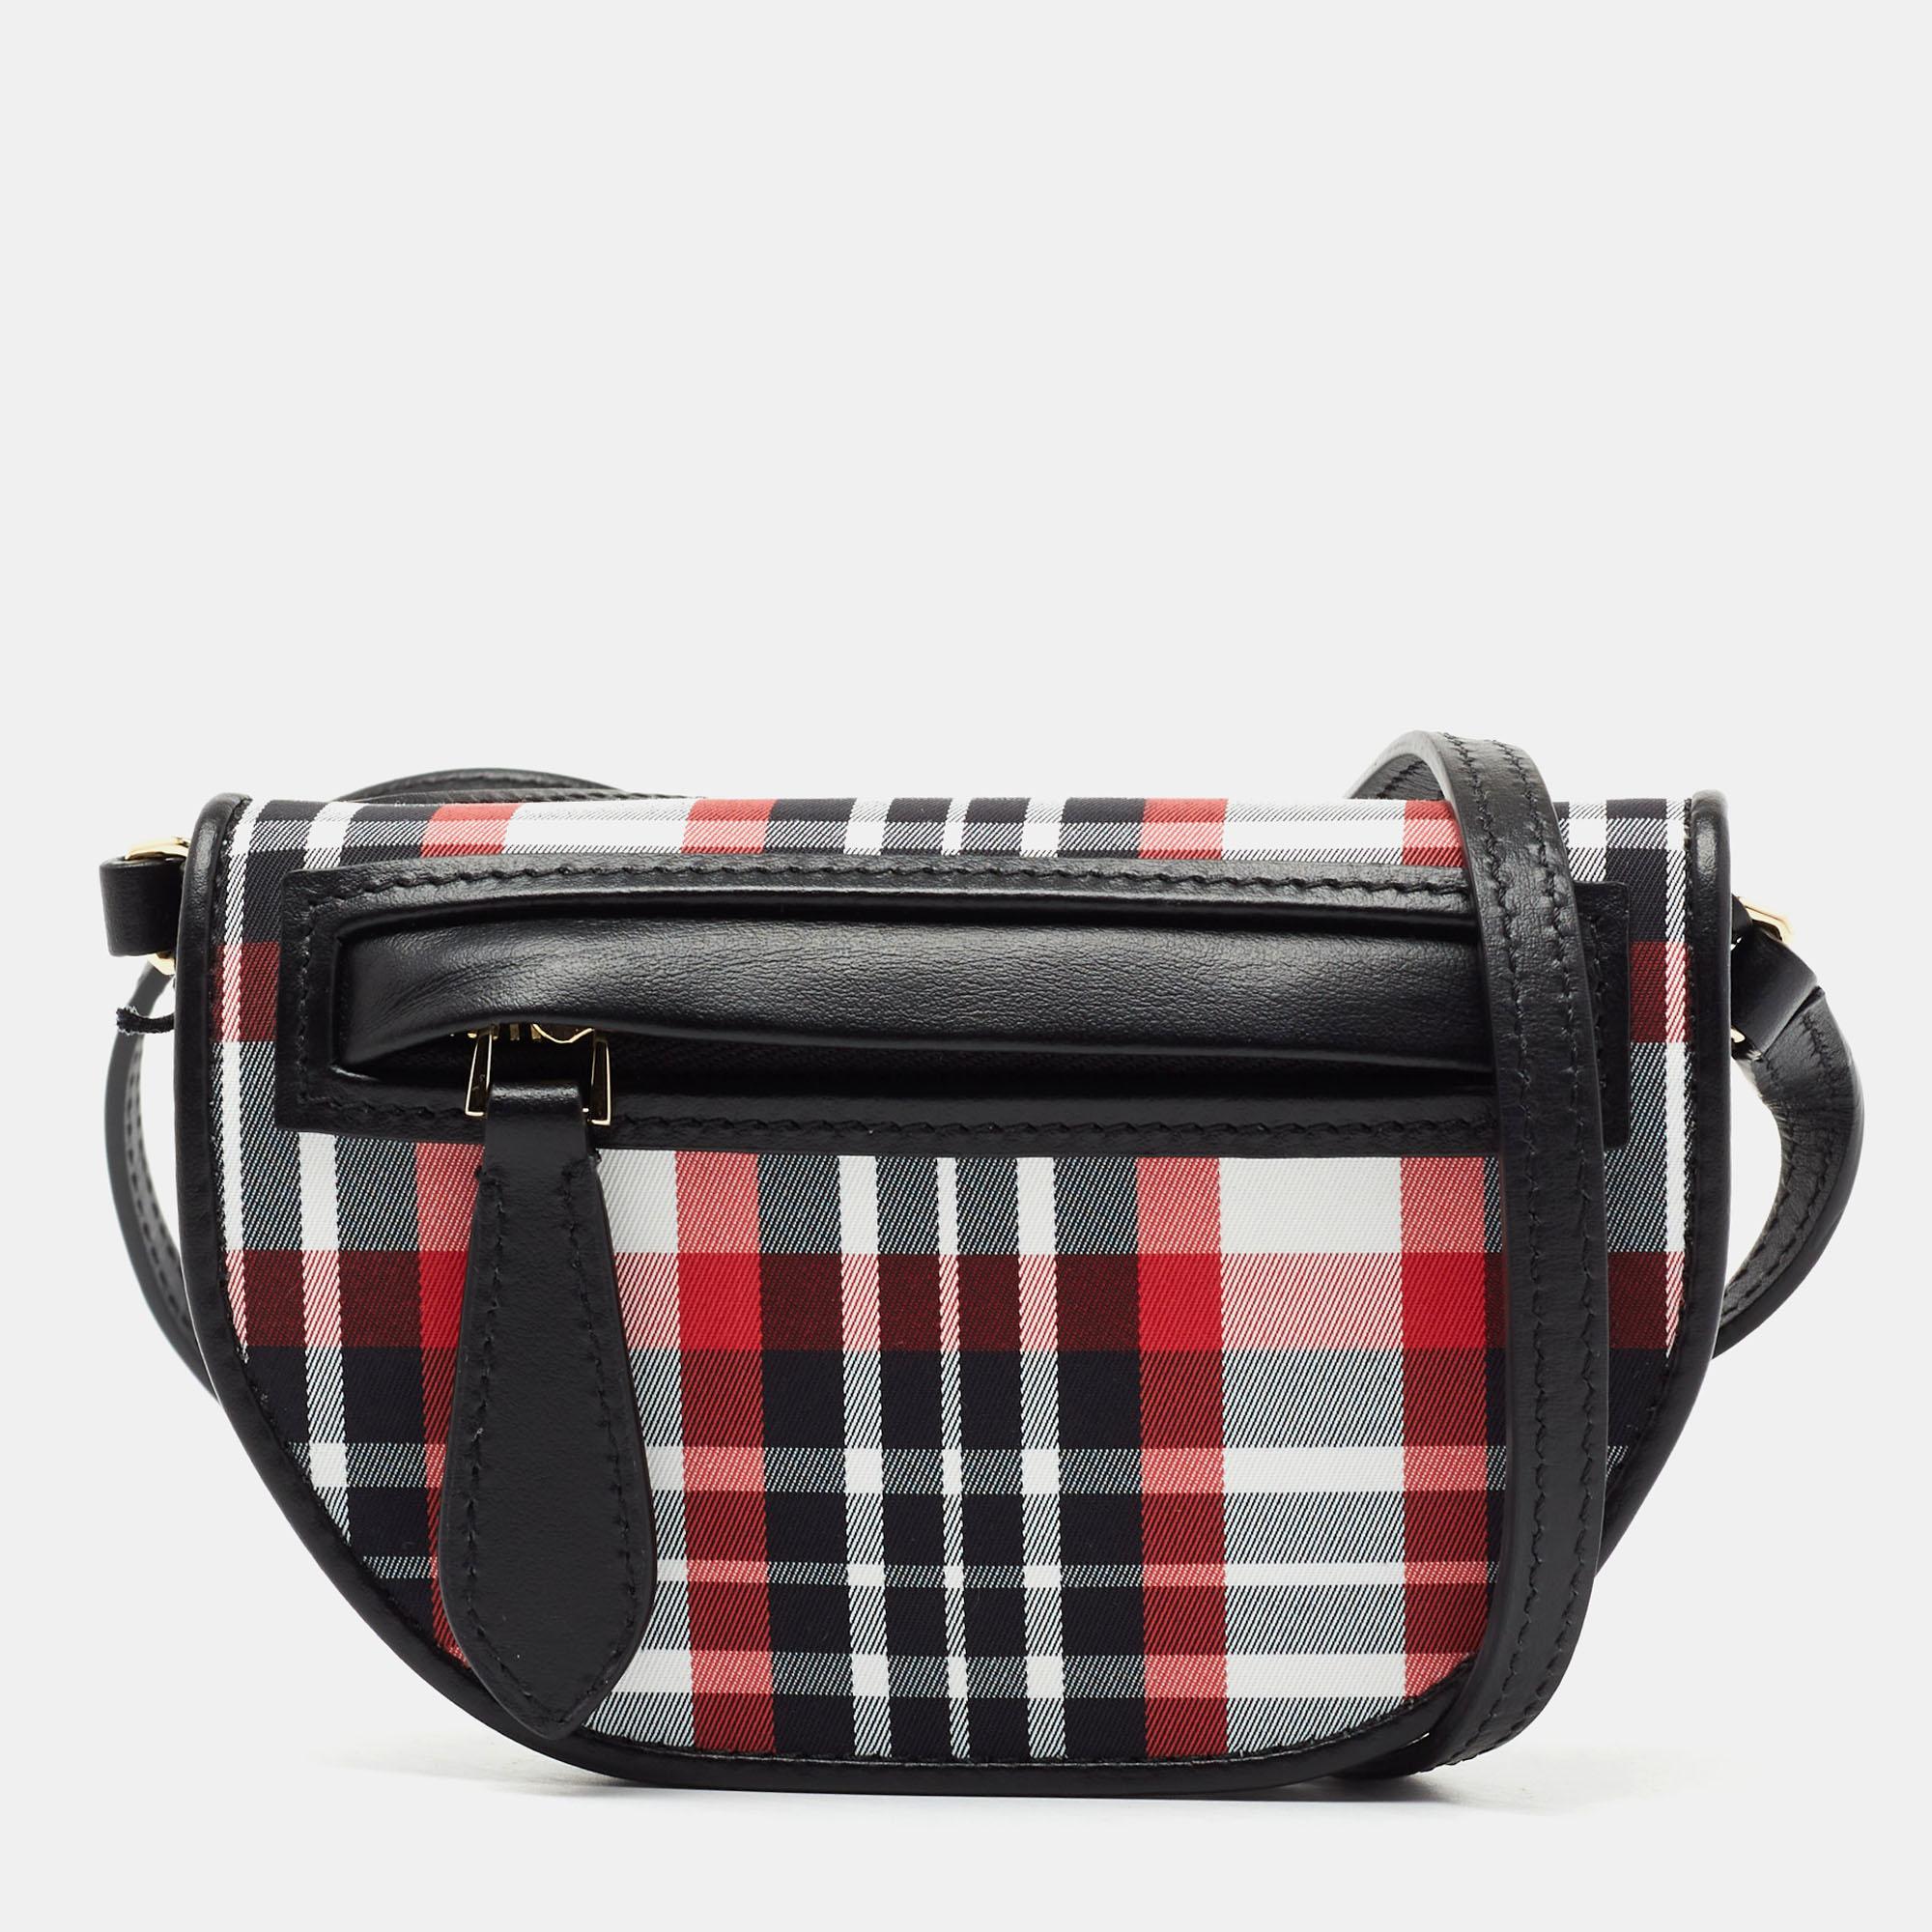 This Burberry crossbody bag is a timeless piece that can last you season after season. The wondrous multicolored bag is made of leather and flaunts a chic Tartan print. It has gold-tone detailing, a flap closure, a long shoulder strap, and a